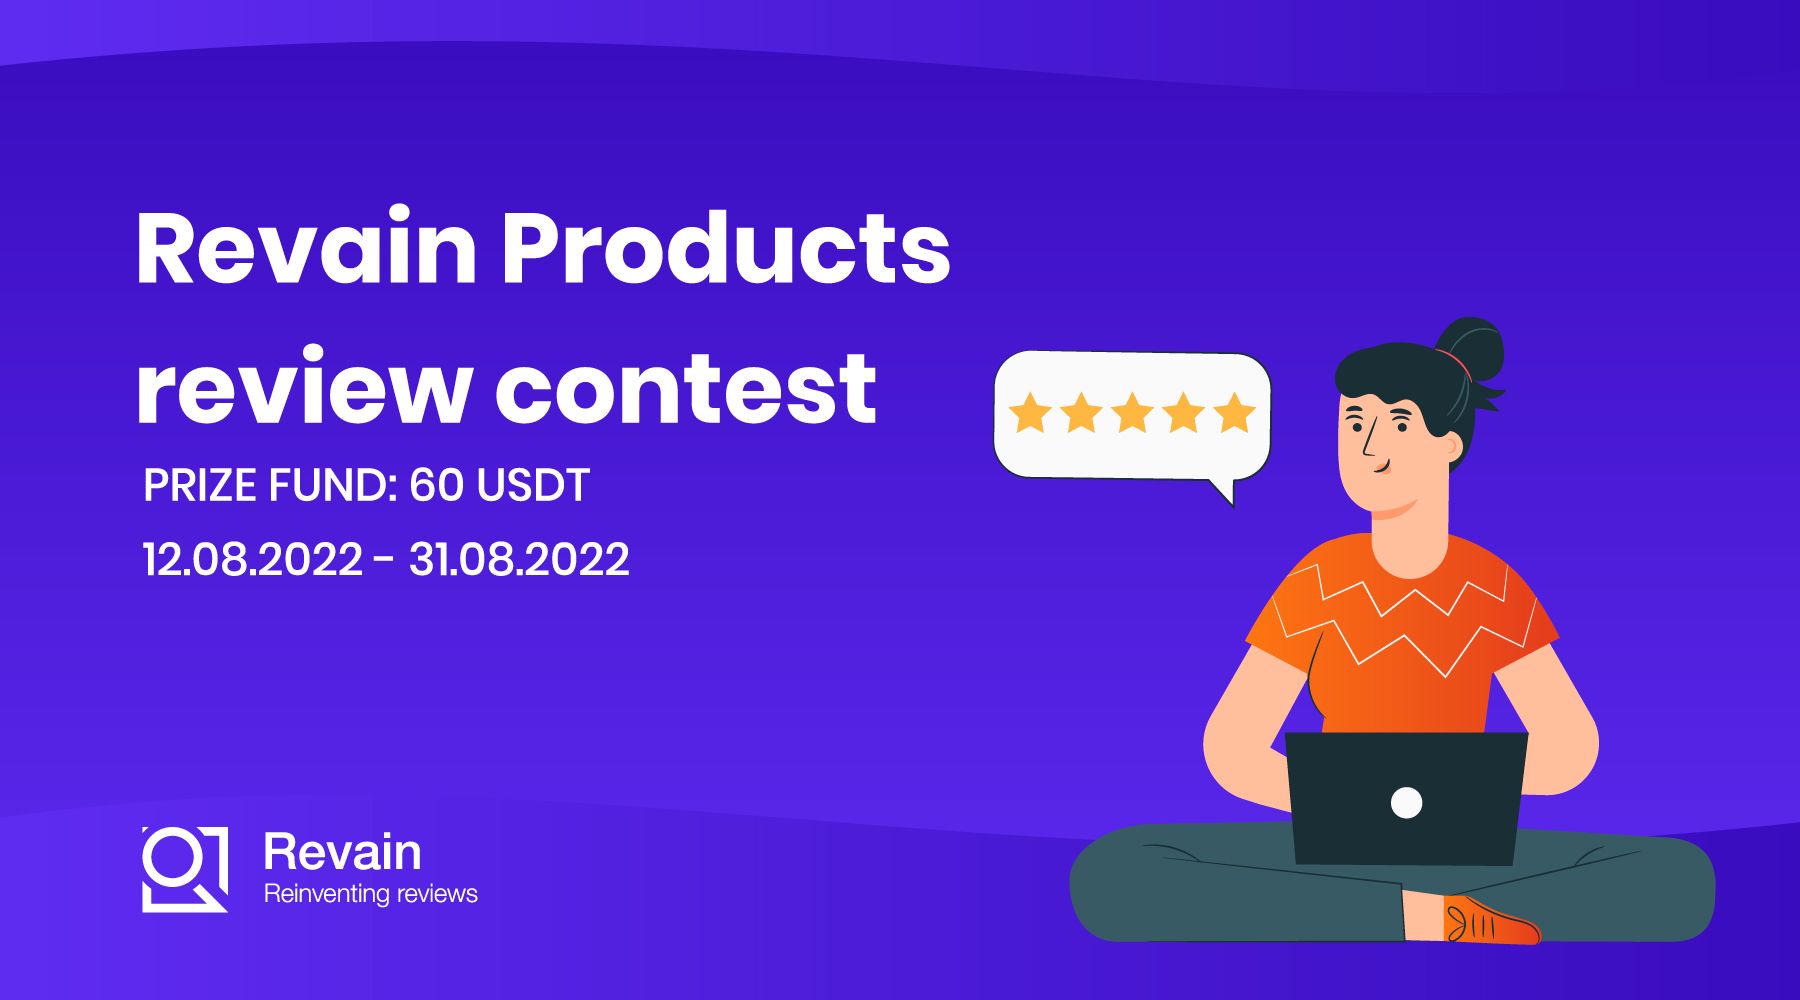 Revain Products review contest!